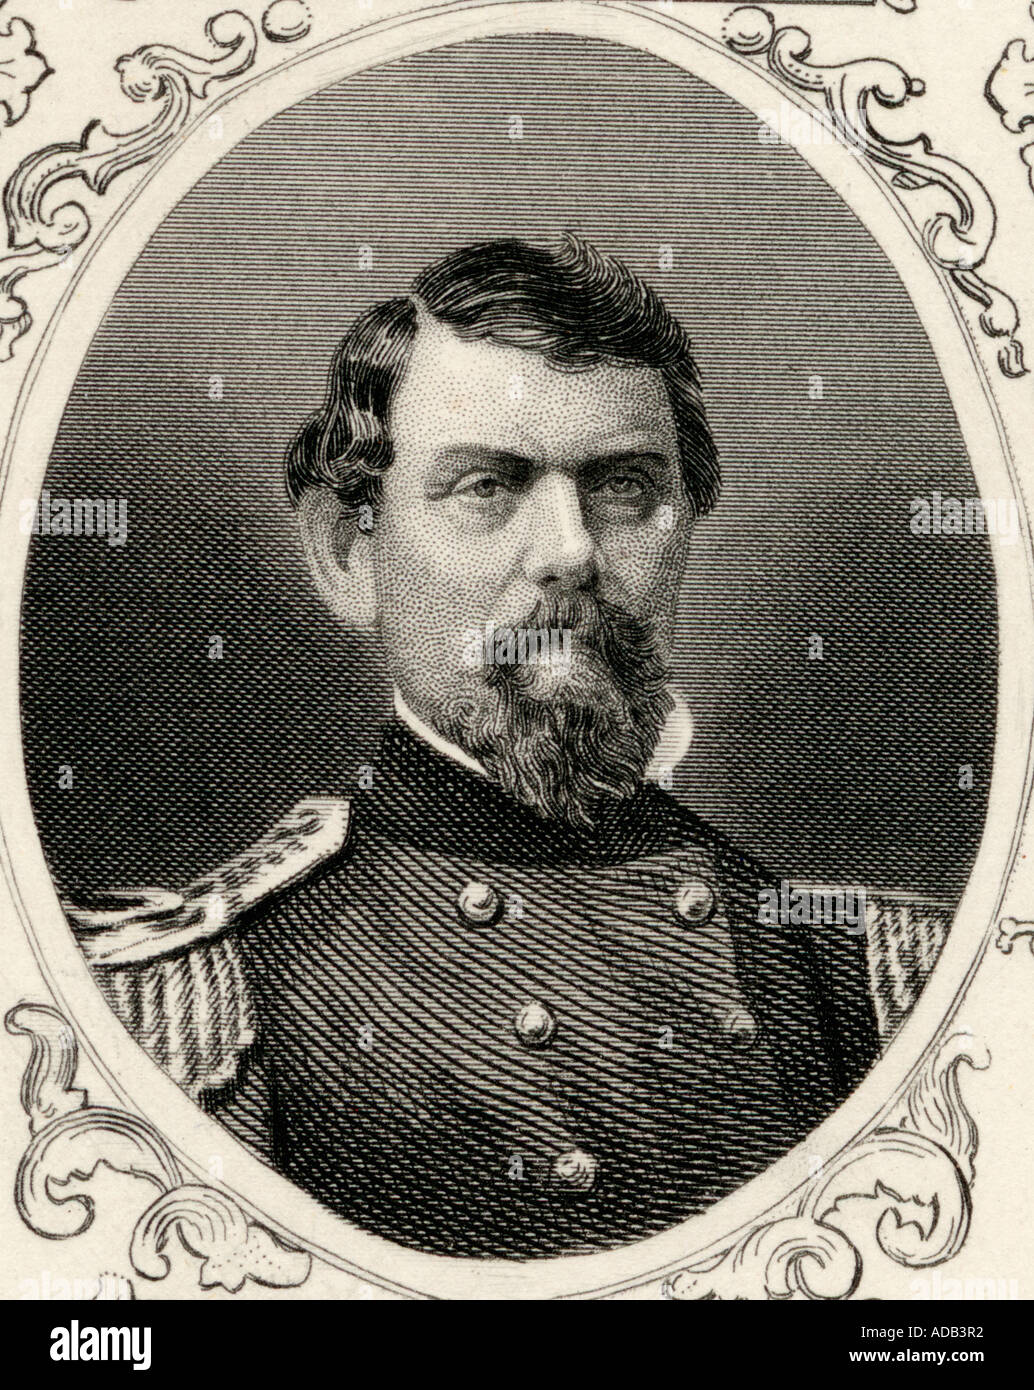 William Joseph Hardee, Old Reliable, 1815 - 1873. American General in the Confederate army during the American Civil War. Stock Photo